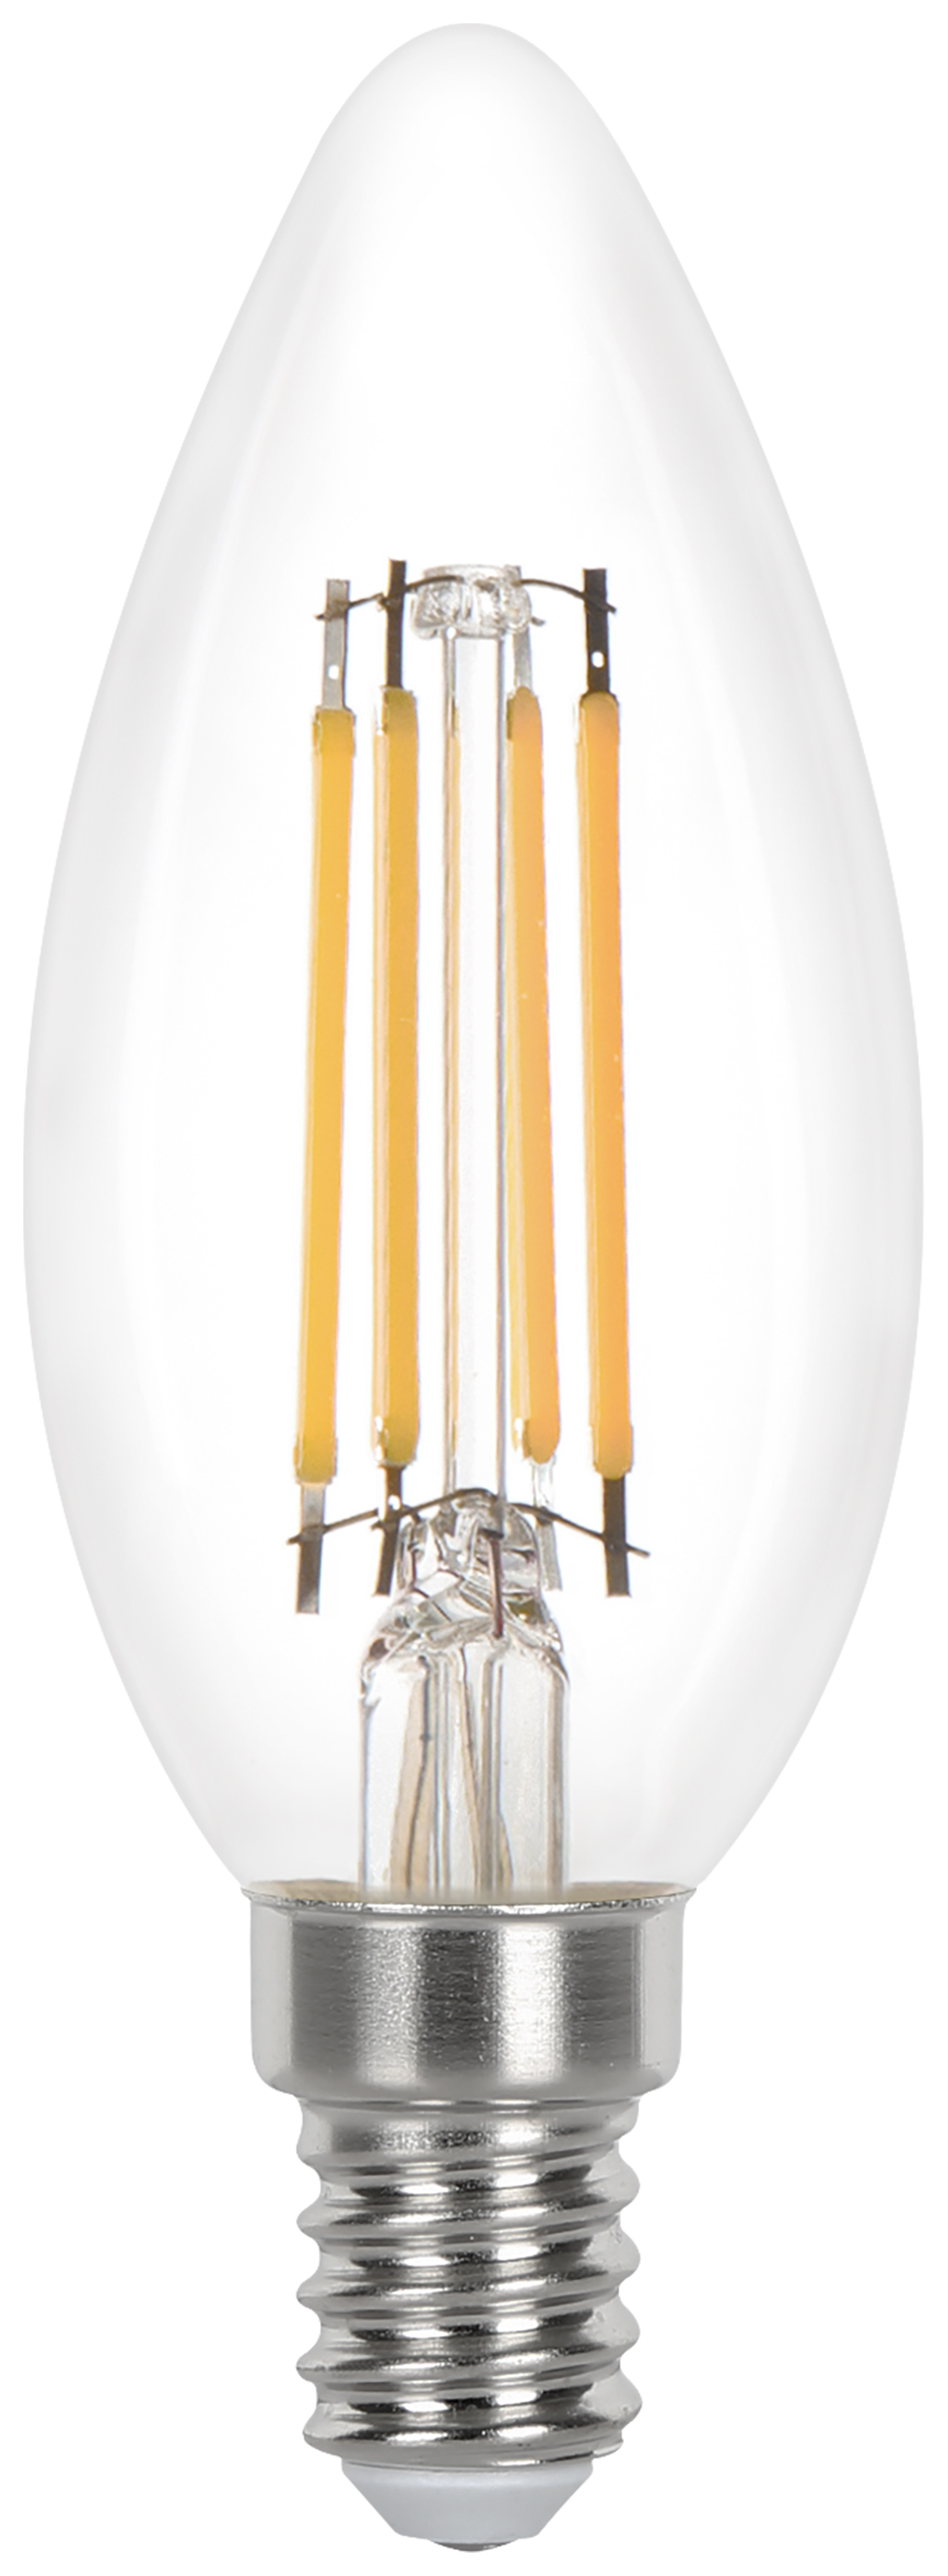 Image of Wickes Non-Dimmable Filament E14 Candle 3.4W Warm White Light Bulb